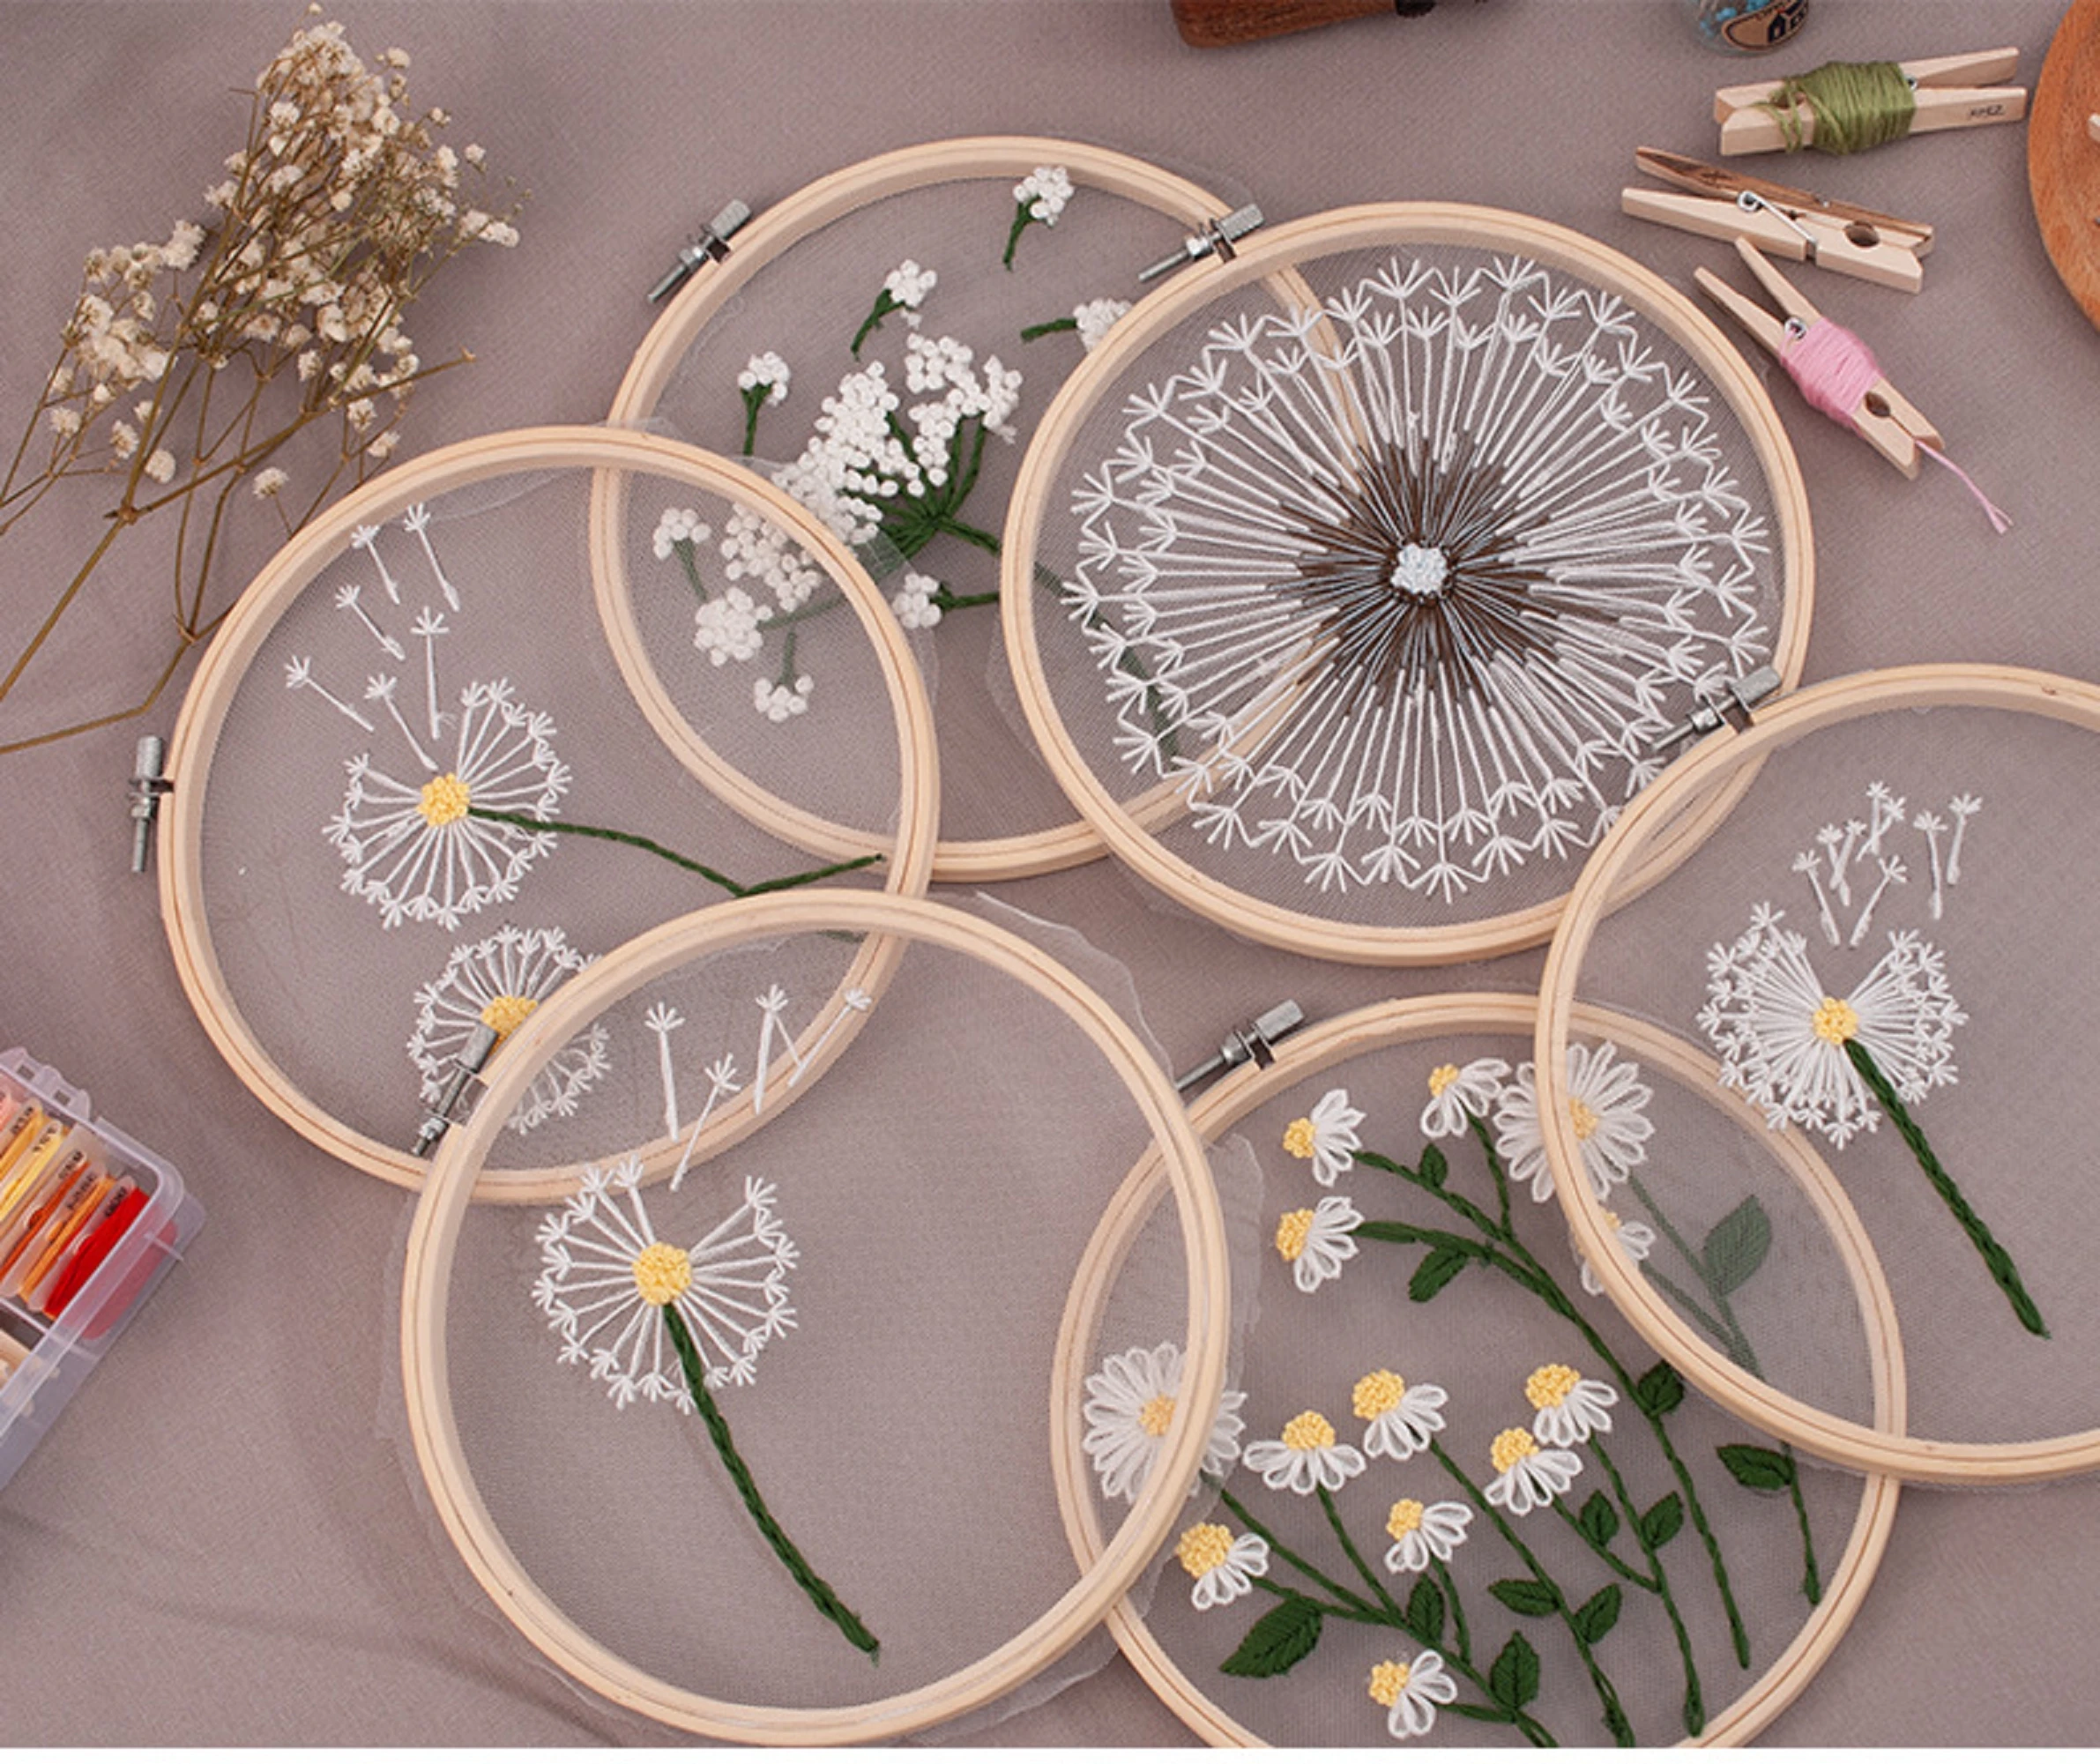 

Transparent Embroidery Kit for Adults with Hoop, Thread, Needles, Full Kit, DIY Craft for Beginner